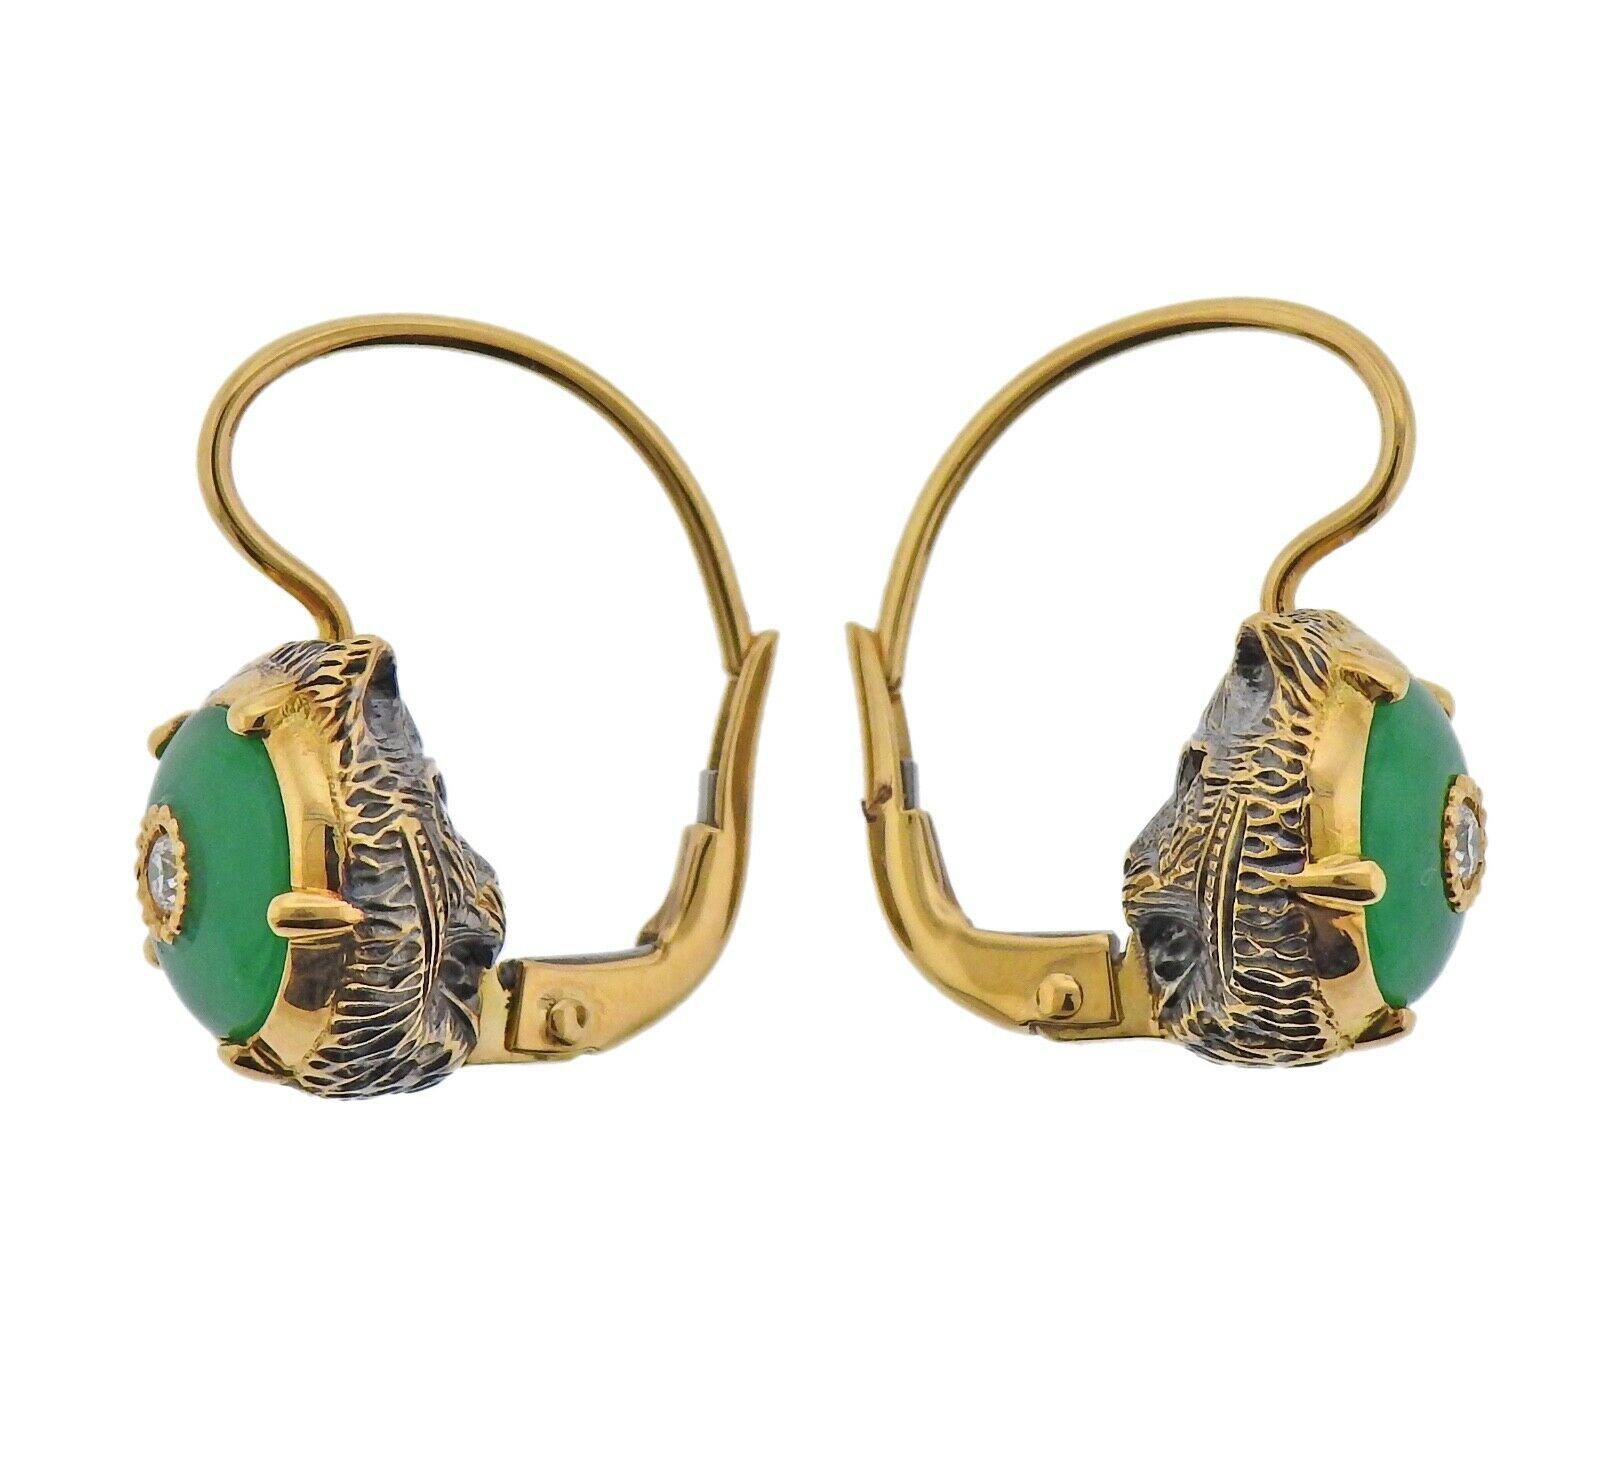 New Le Marches Des Marseilles 18k gold pair of earrings by Gucci, with diamonds and jade. Come with box and papers.  Earrings are 20mm long x 11mm. Weight - 7.3 grams. Marked: Gucci, Au 750, made in Italy. 